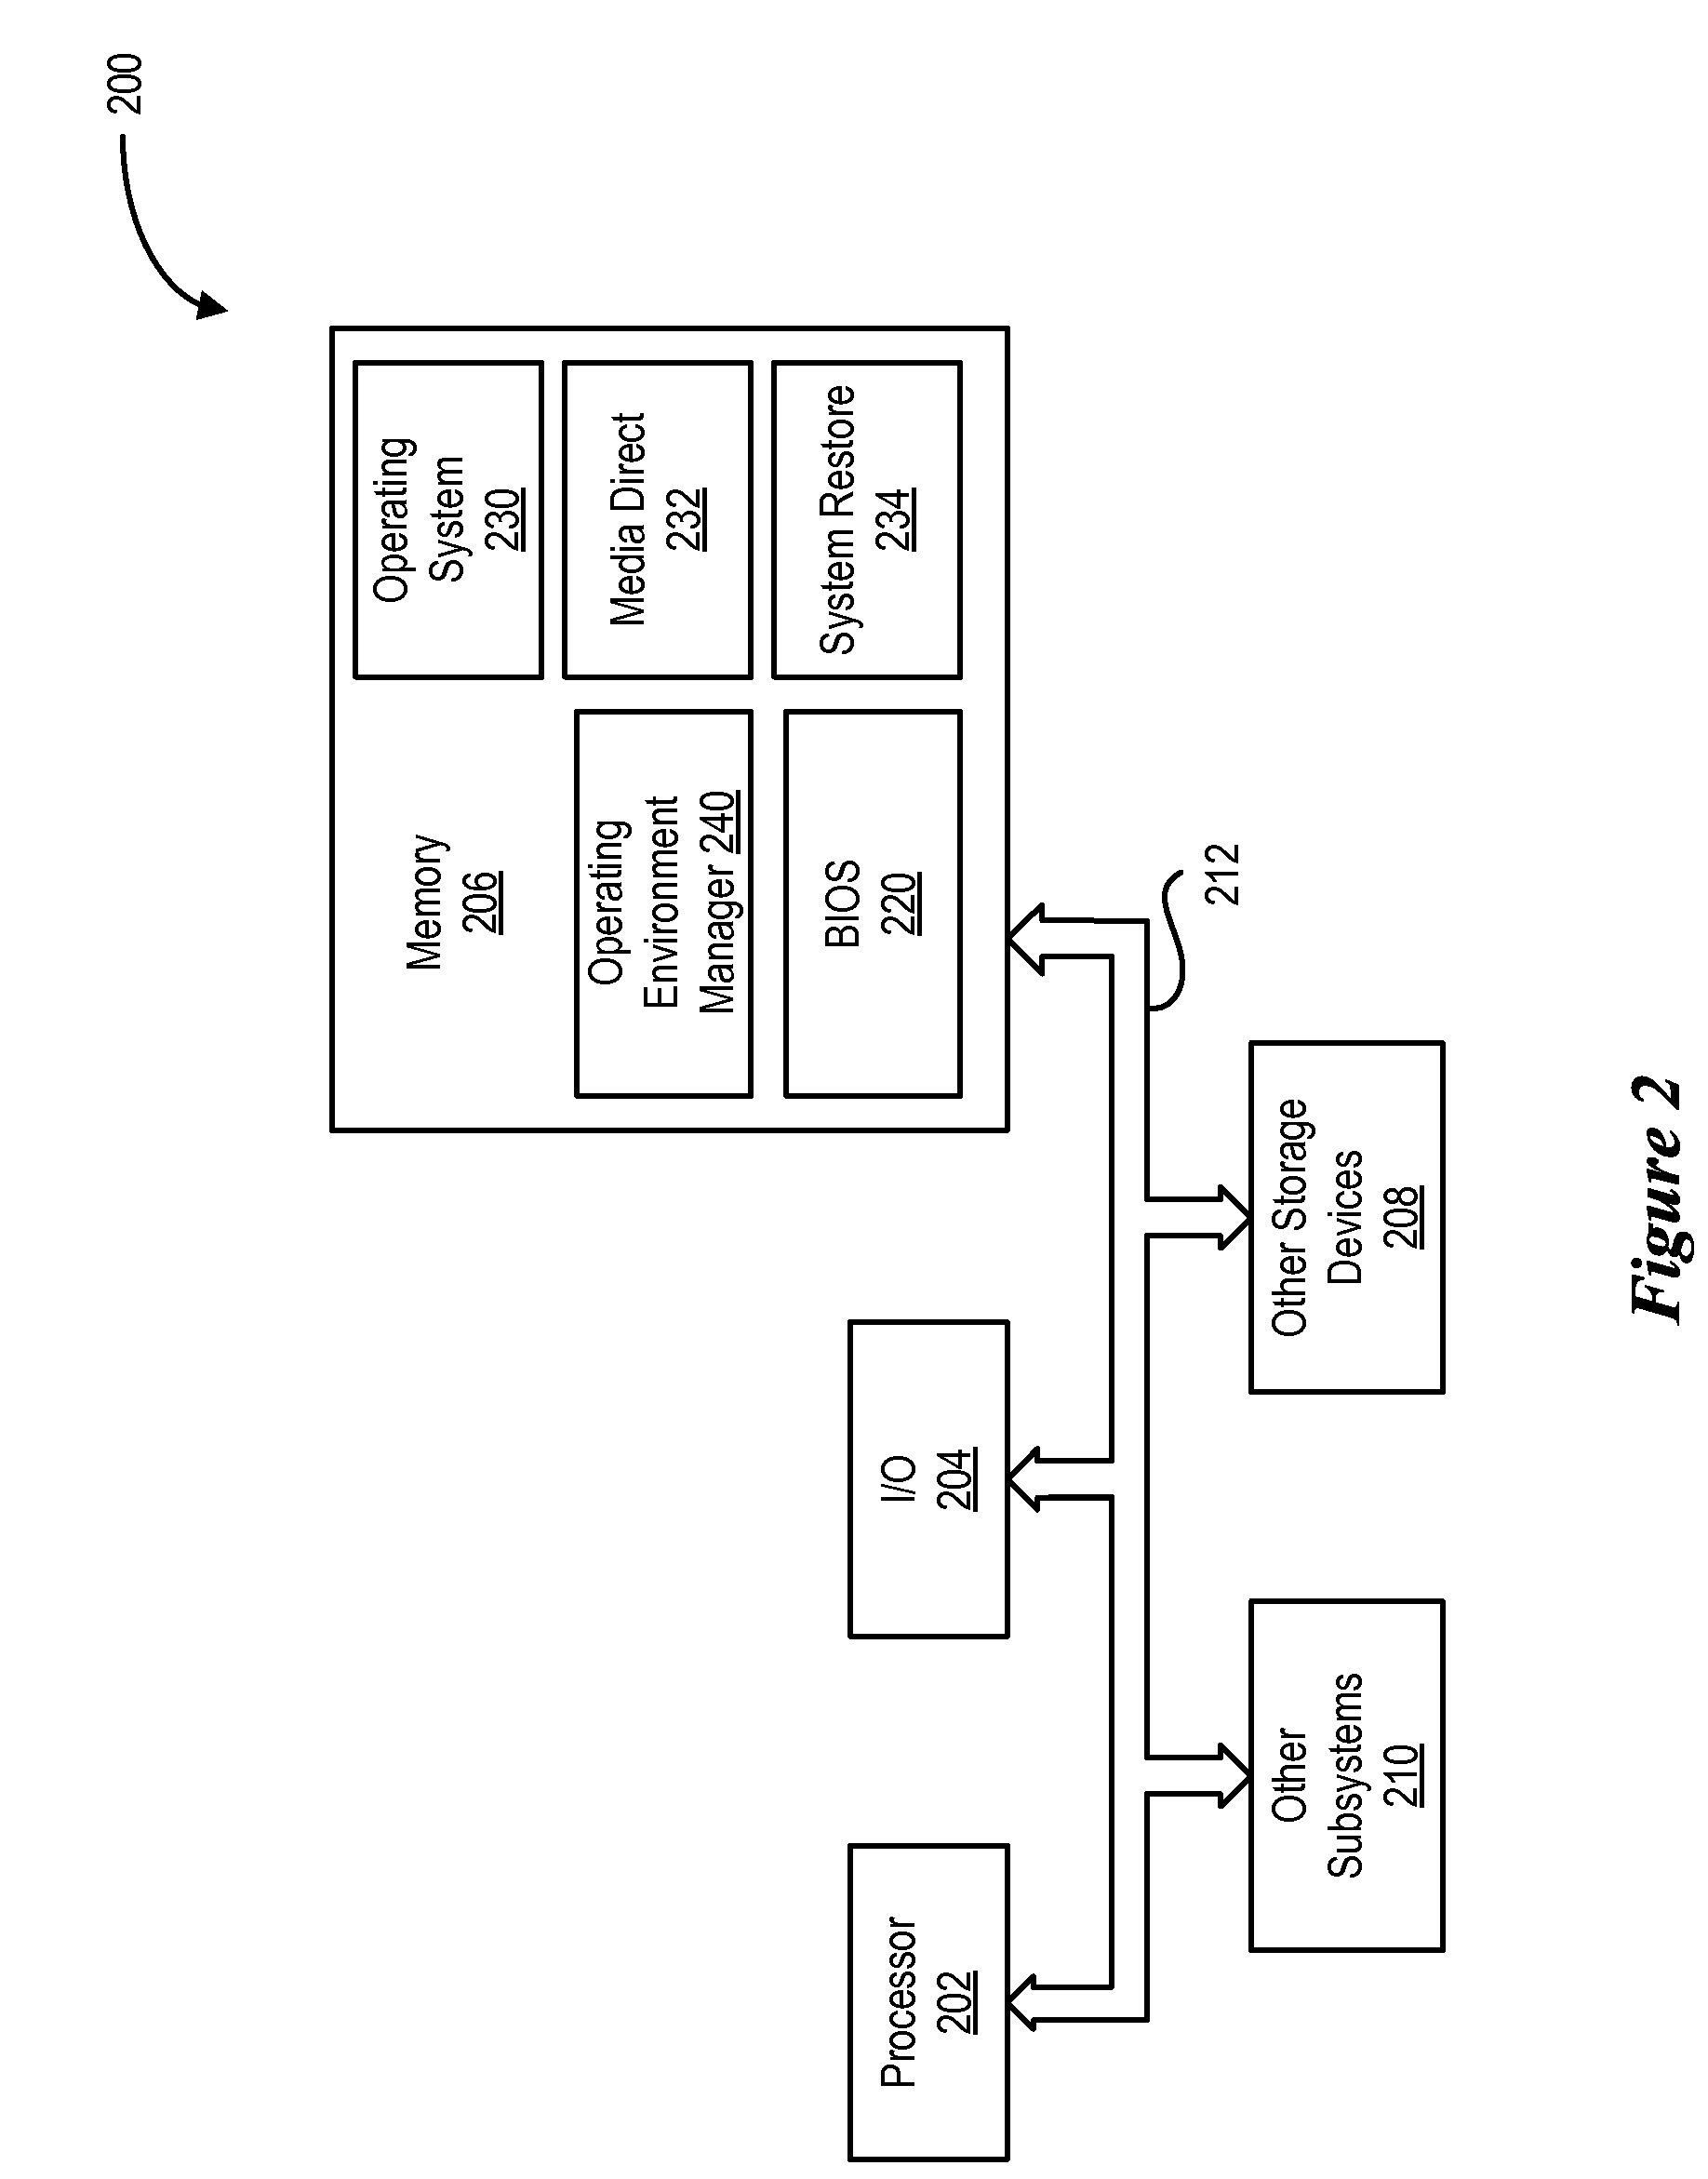 System for registering and initiating pre-boot environment for enabling partitions